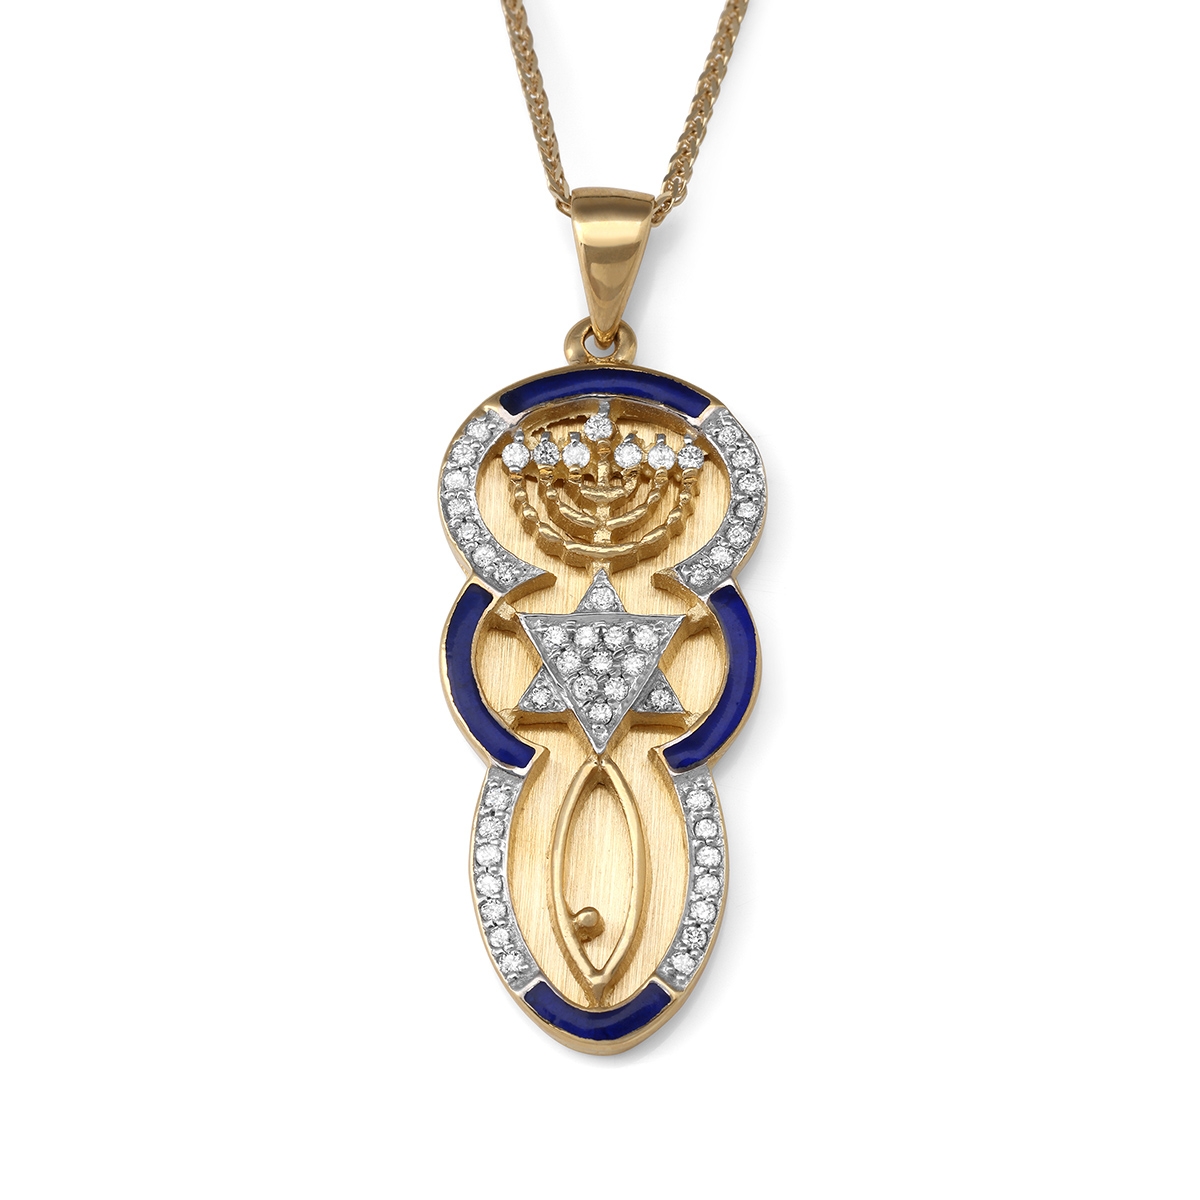 Anbinder Jewelry 14K Yellow Gold Messianic Seal Bubble Frame Unisex Pendant with Diamonds and Blue Enamel - 1